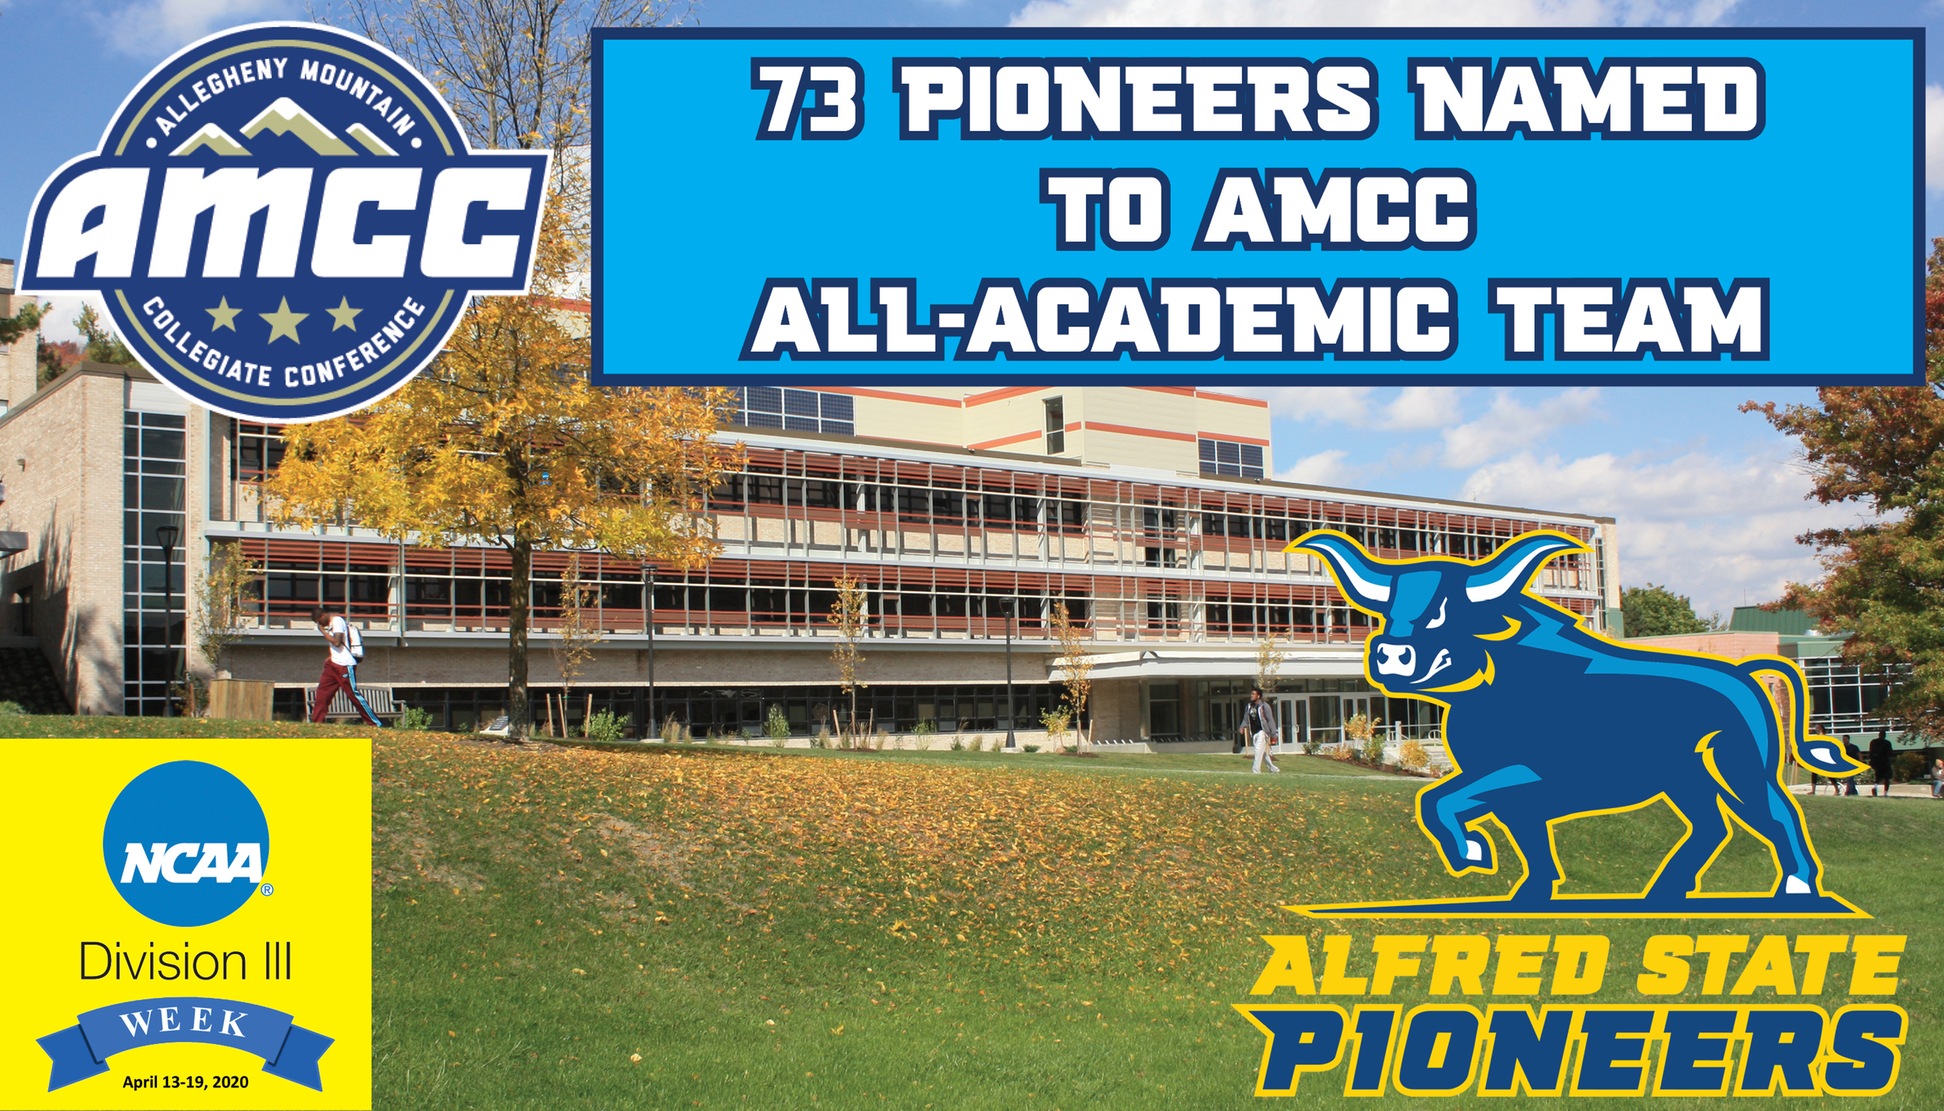 73 Pioneers Named to AMCC All-Academic Team